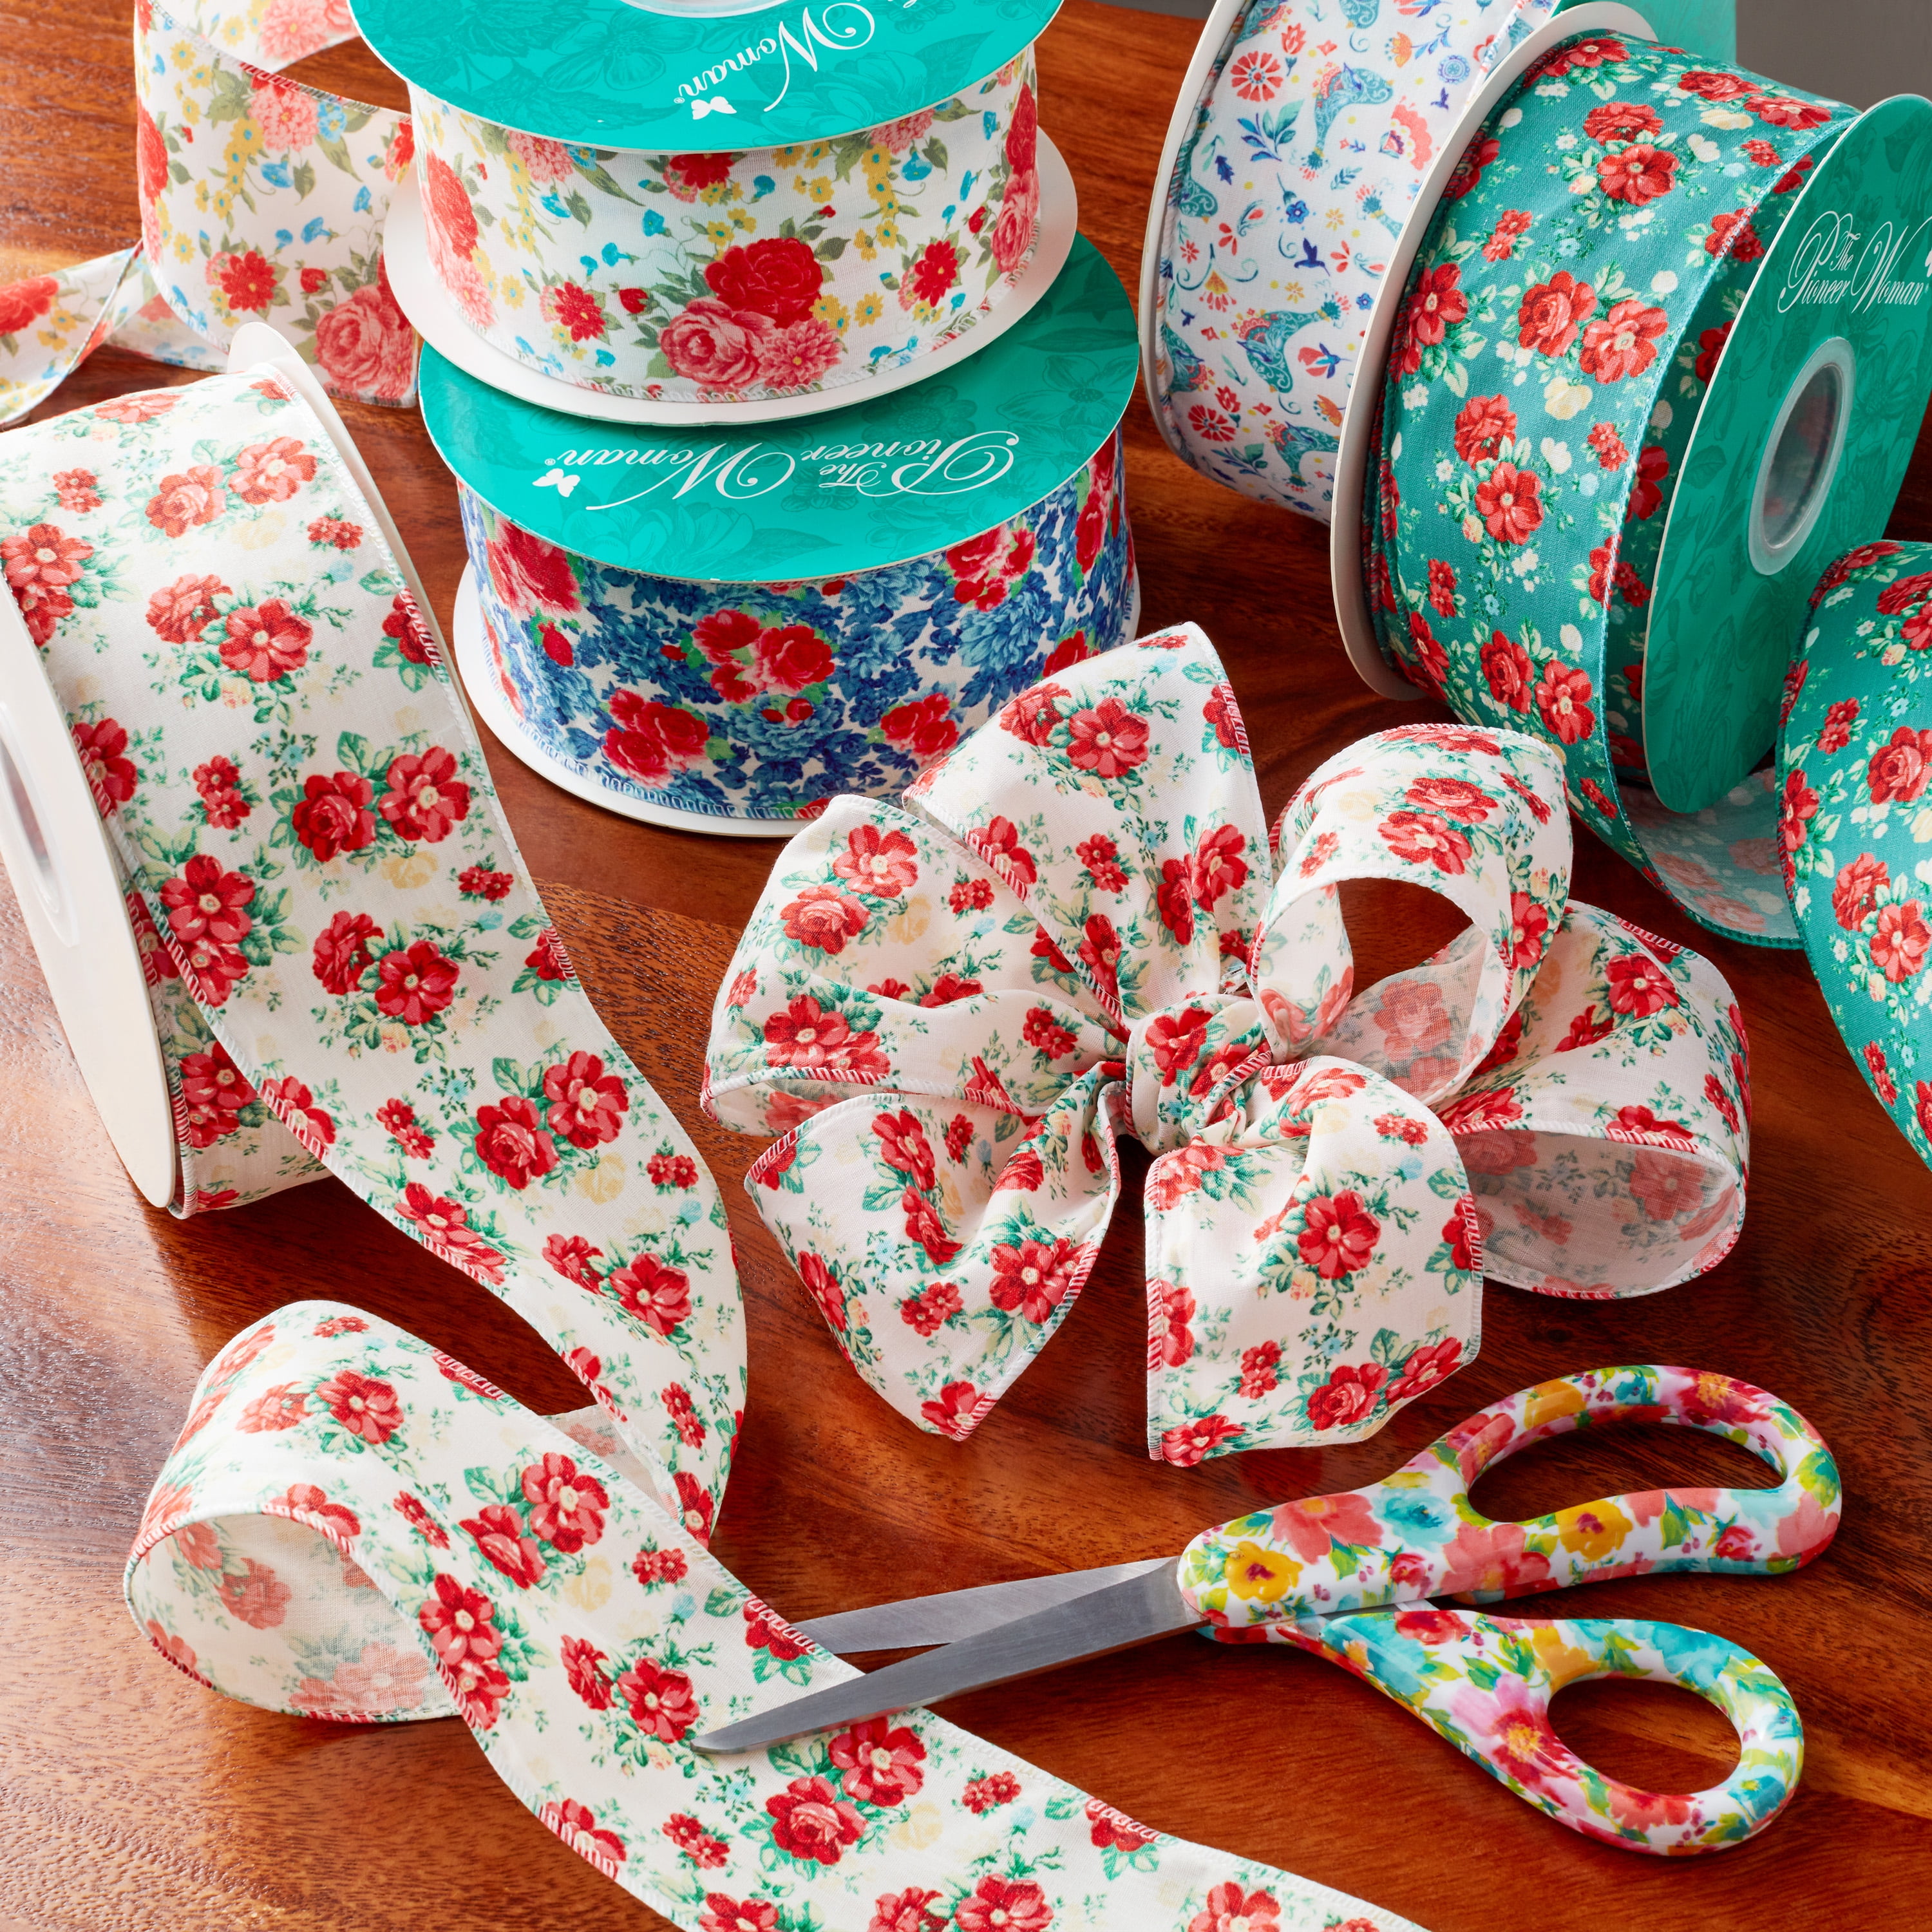 The Pioneer Woman Heritage Floral Polyester Merrow Wire Edge Ribbon, 2.5 inch x 25 Yards, Size: 2.5 inch Wide x 25 Yards